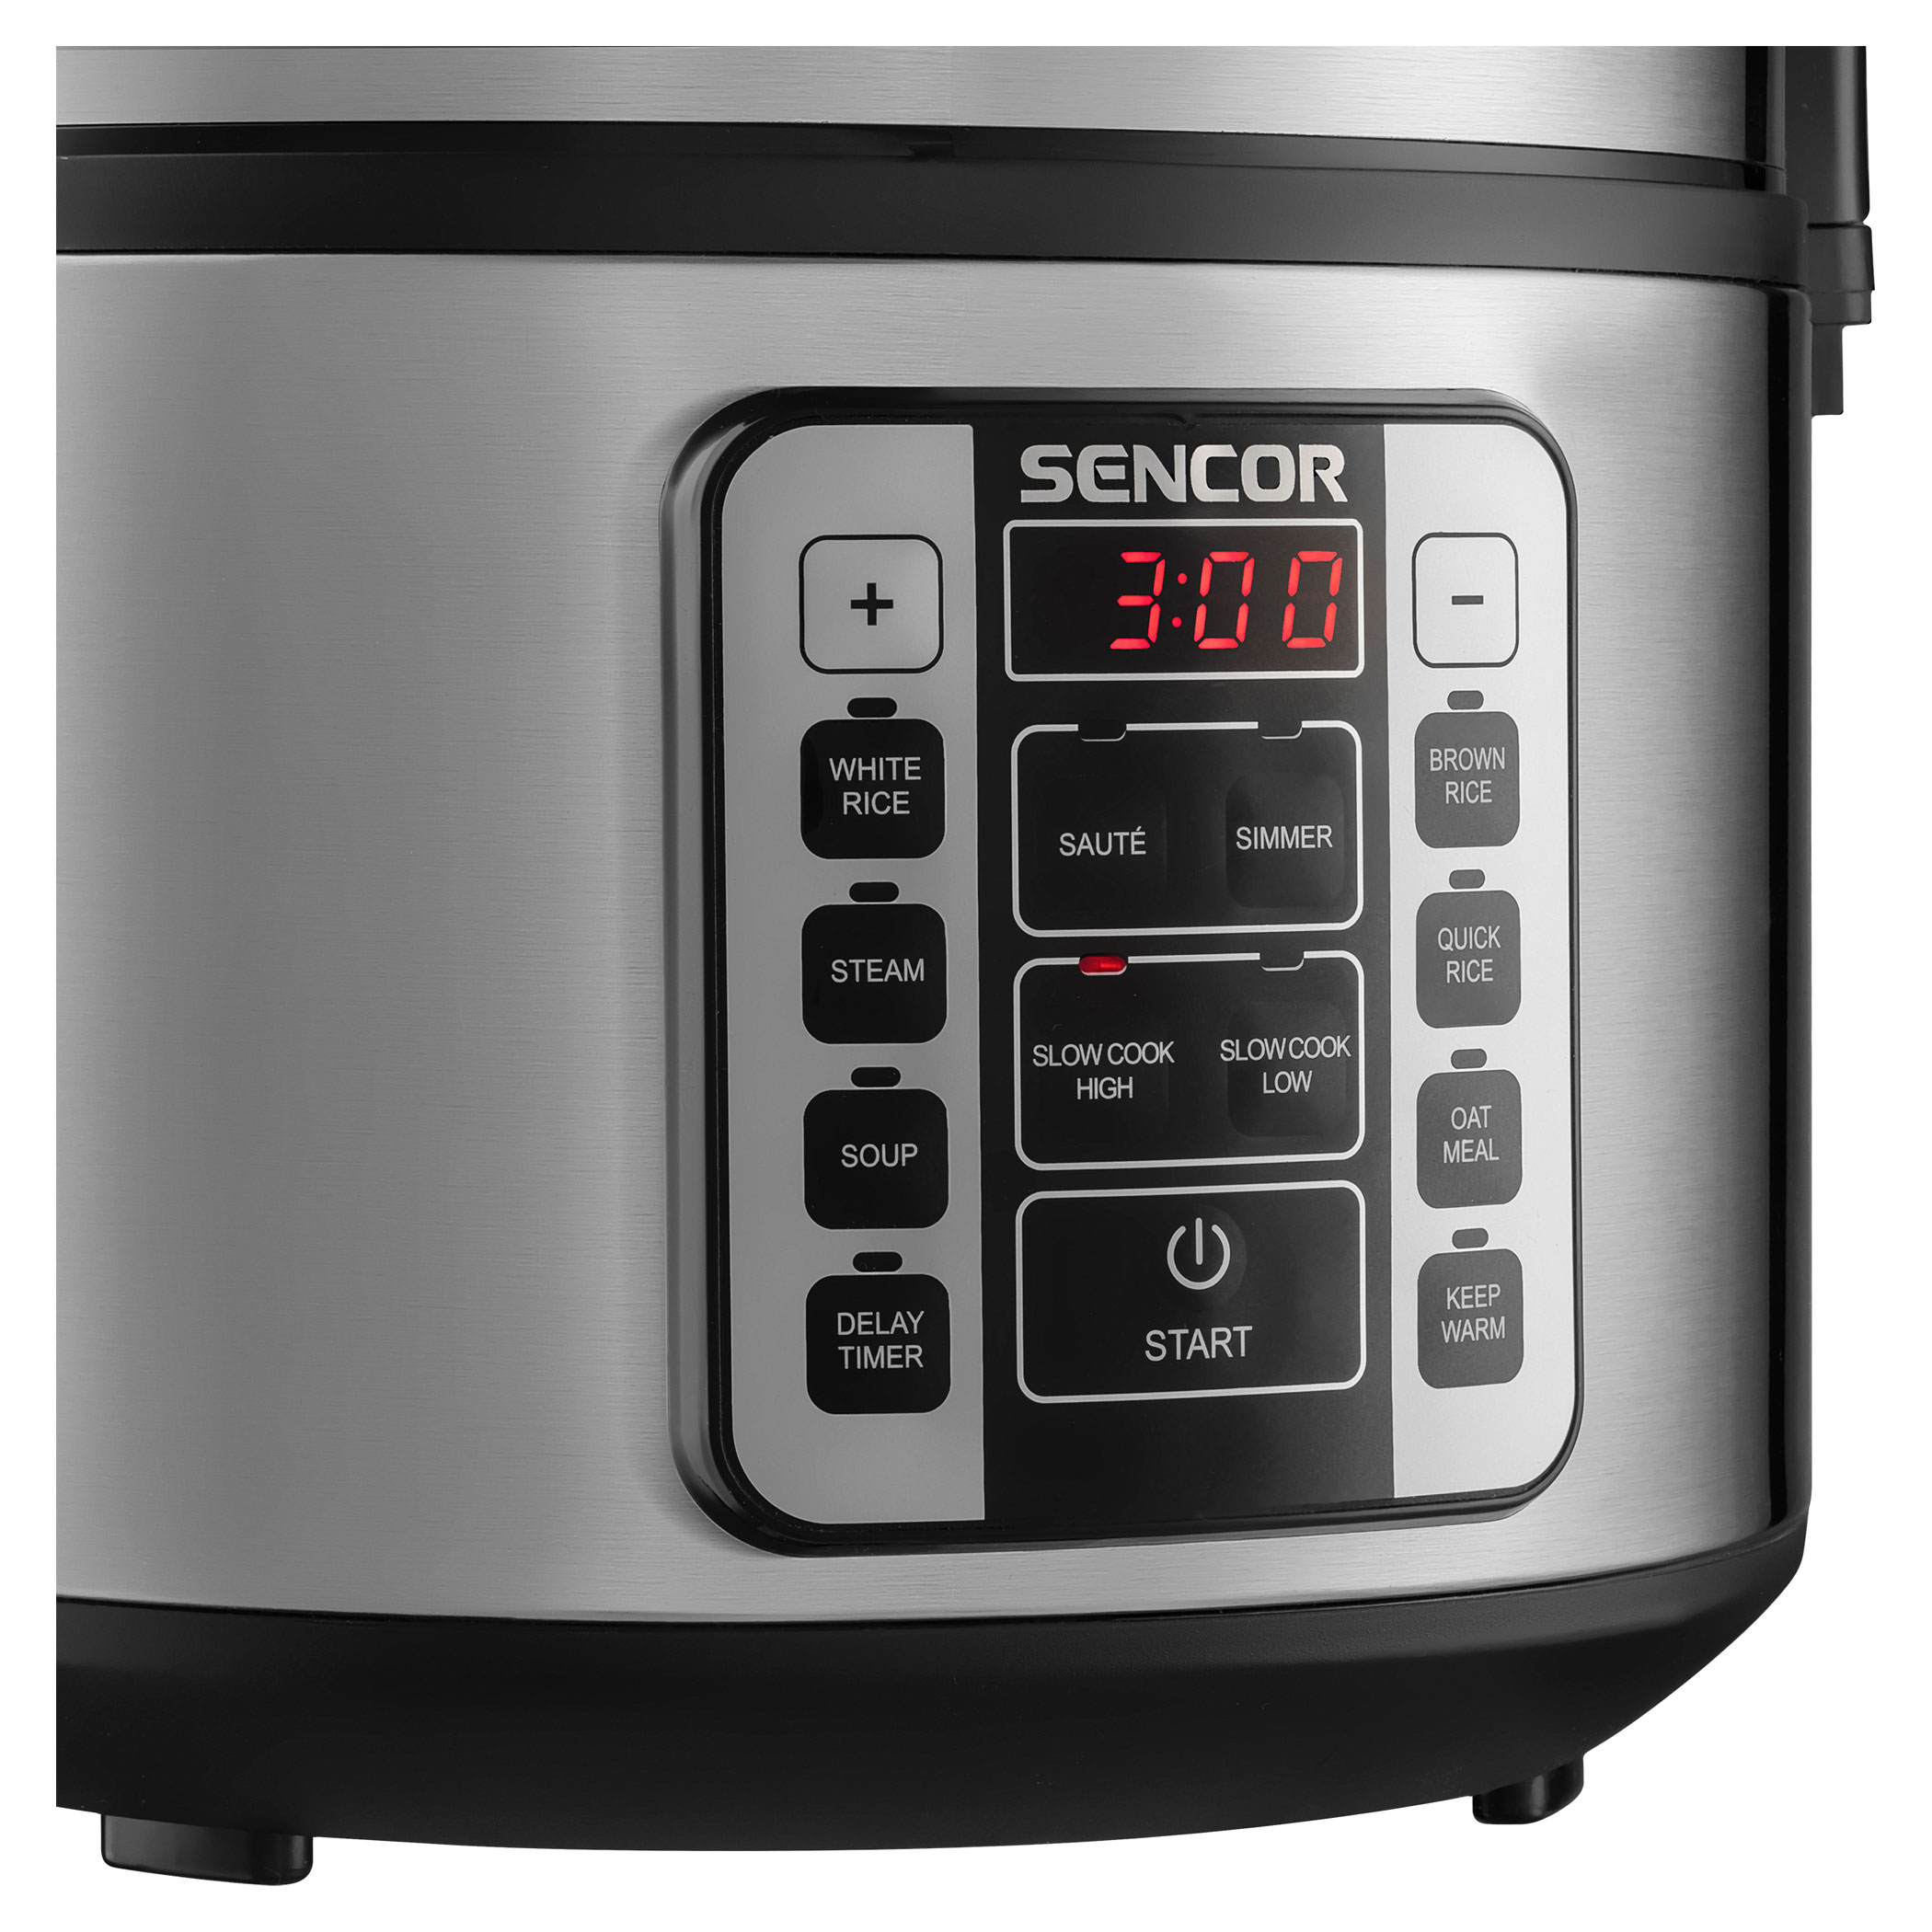 Multifunctional Rice Cooker, SRM 3150SS